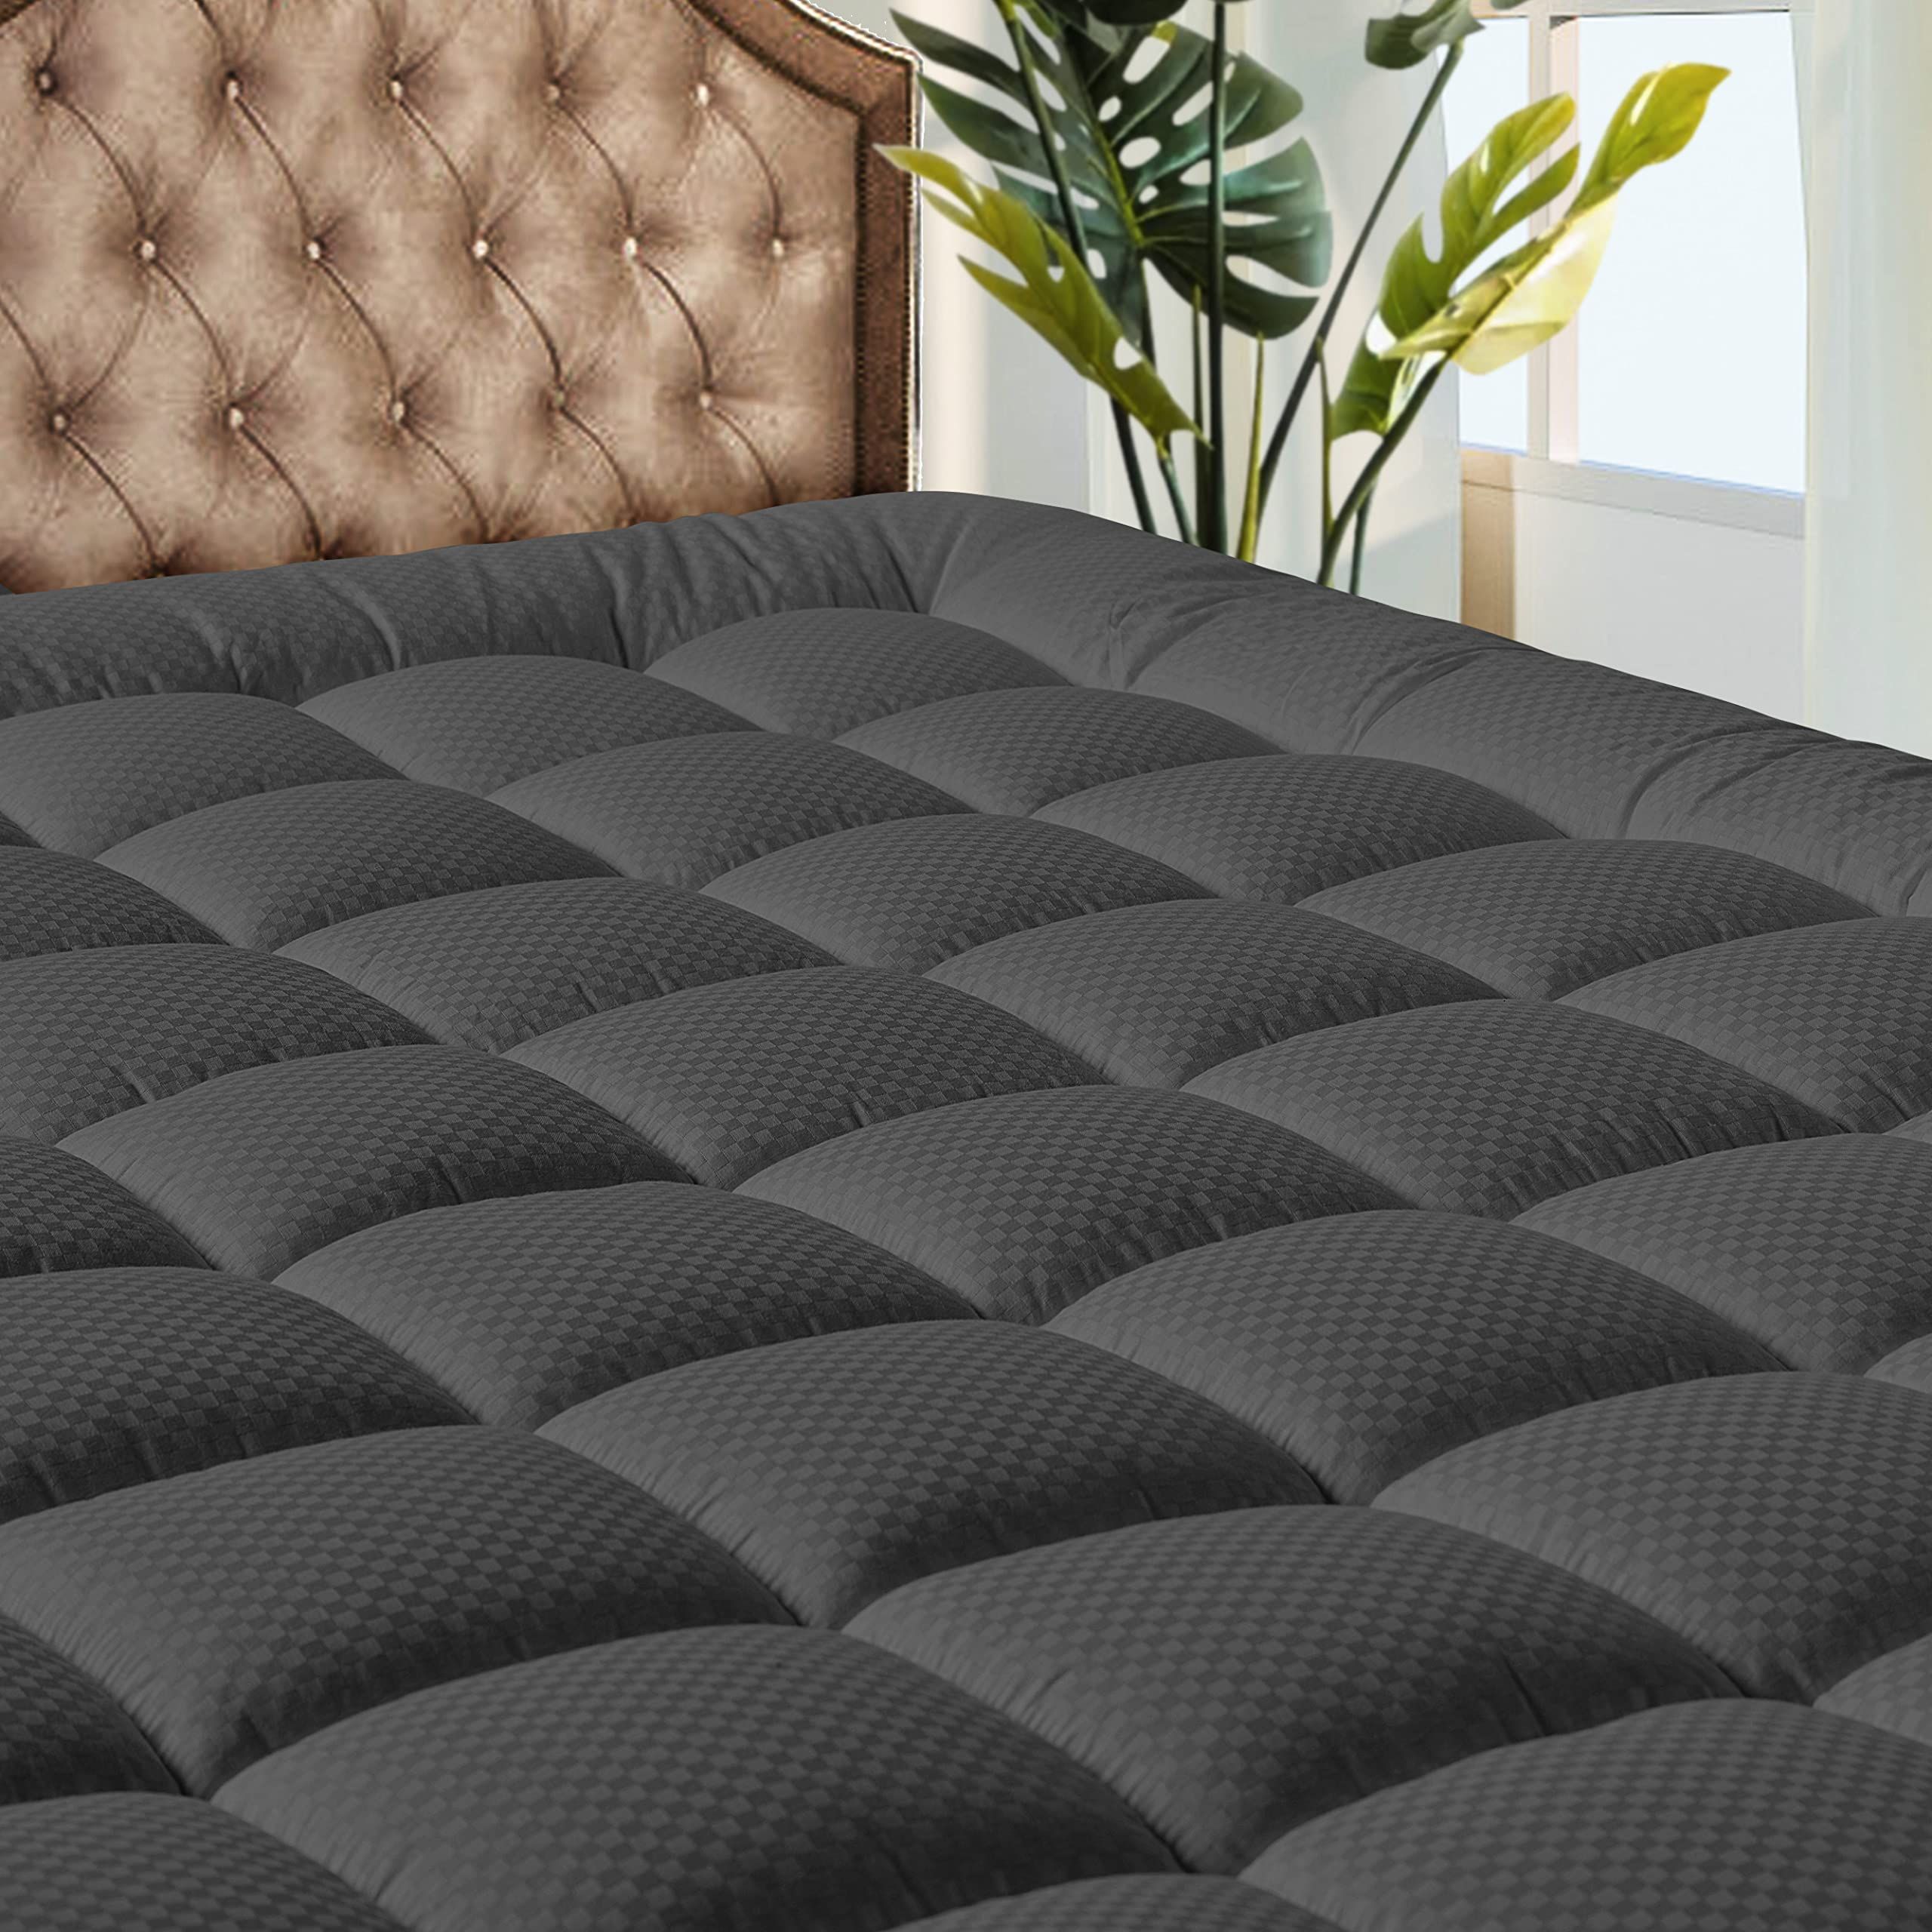 9 Best Twin XL Mattress Toppers of 2023, Reviewed by Experts